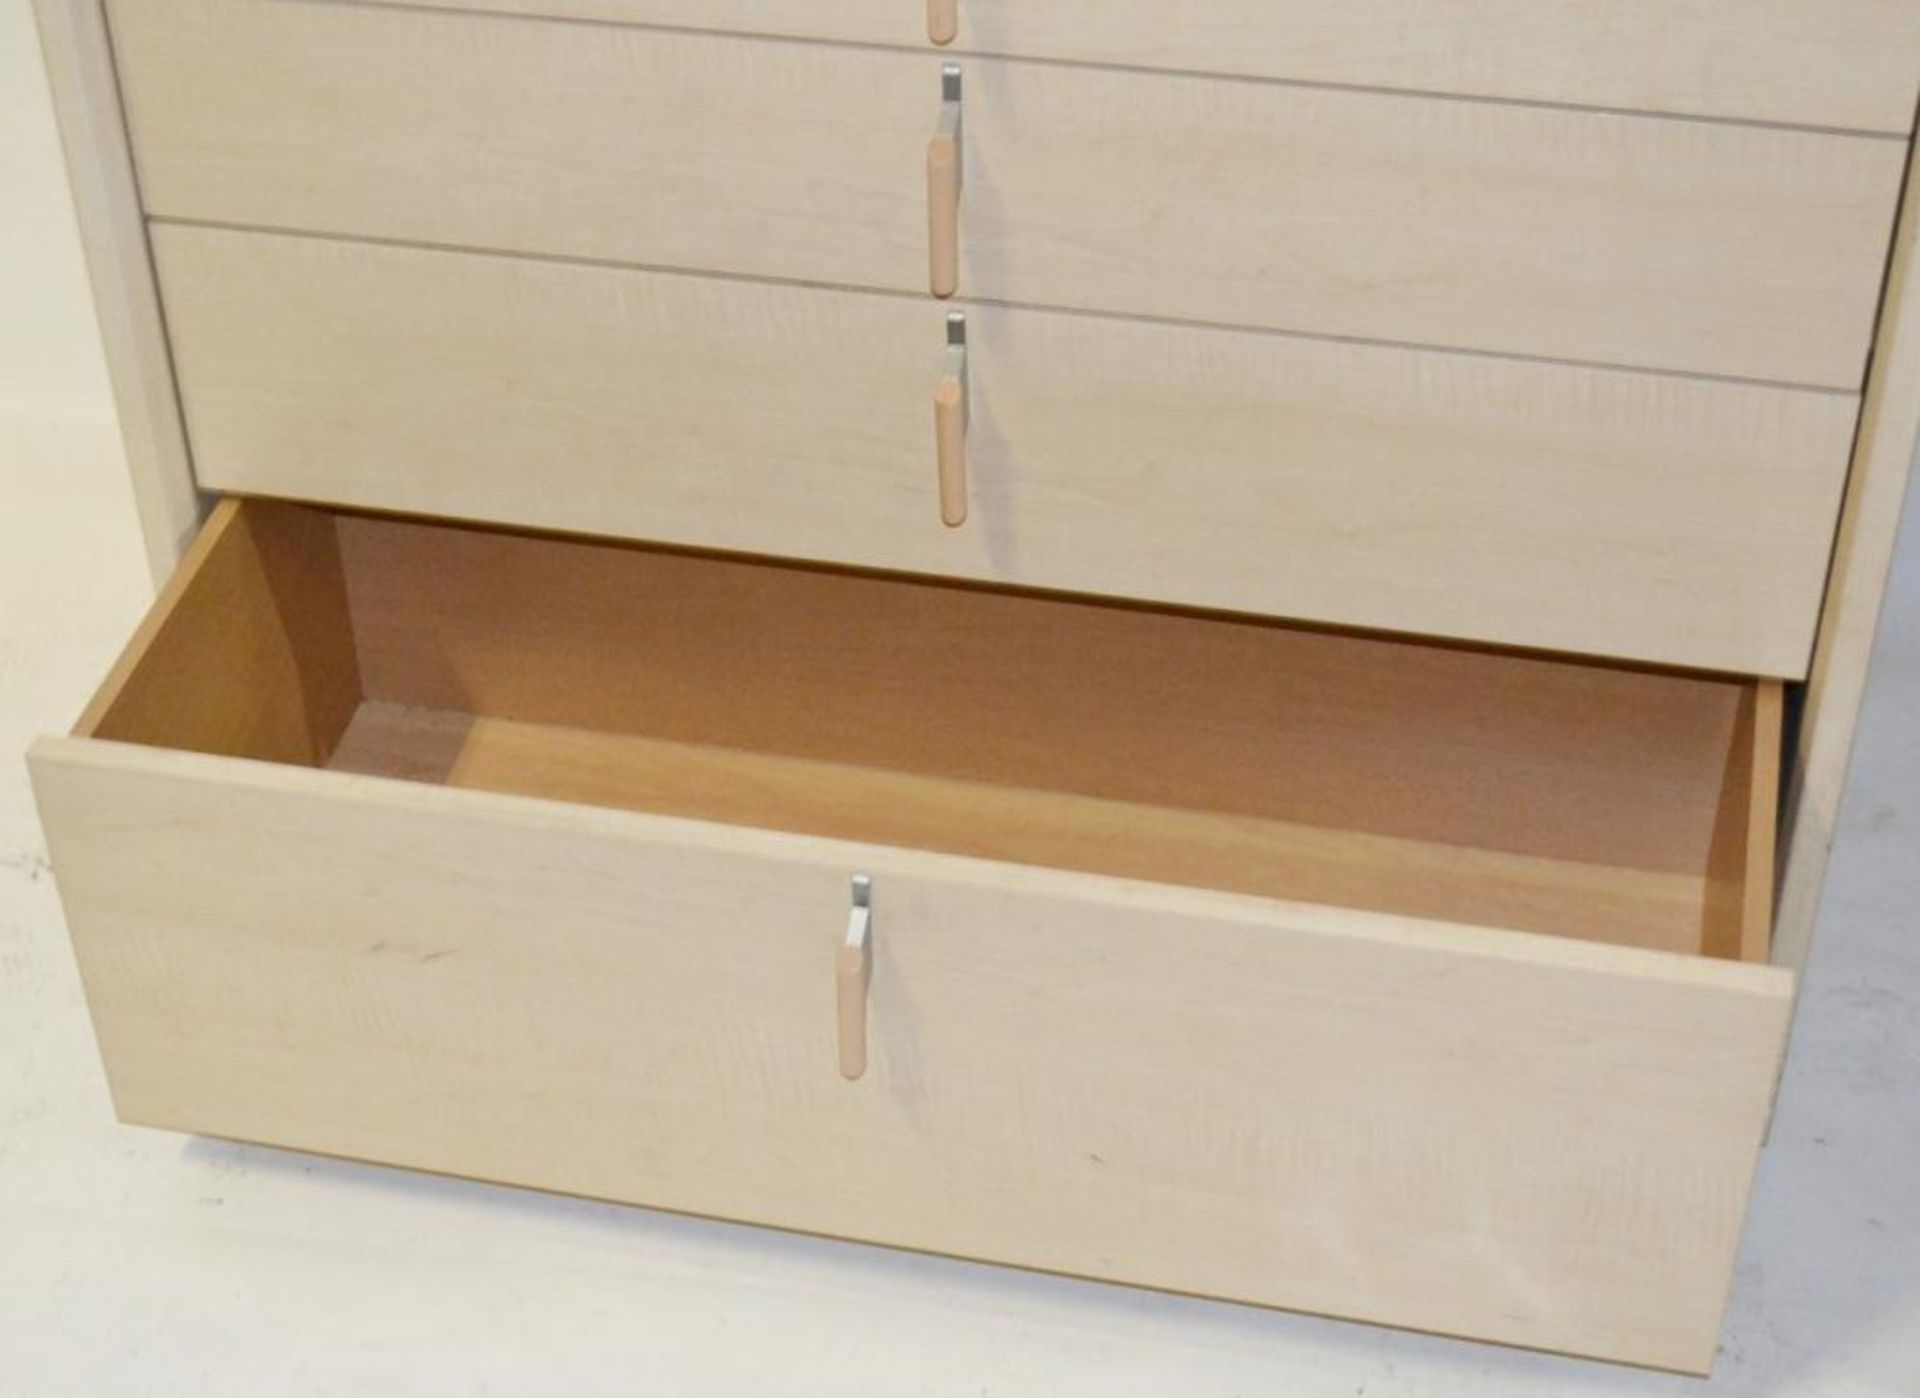 1 x GAUTIER Chest Of Drawers With A Natural Oak Finish - Dimensions: W94 x D45 x H79.5cm - CL268 - R - Image 3 of 5